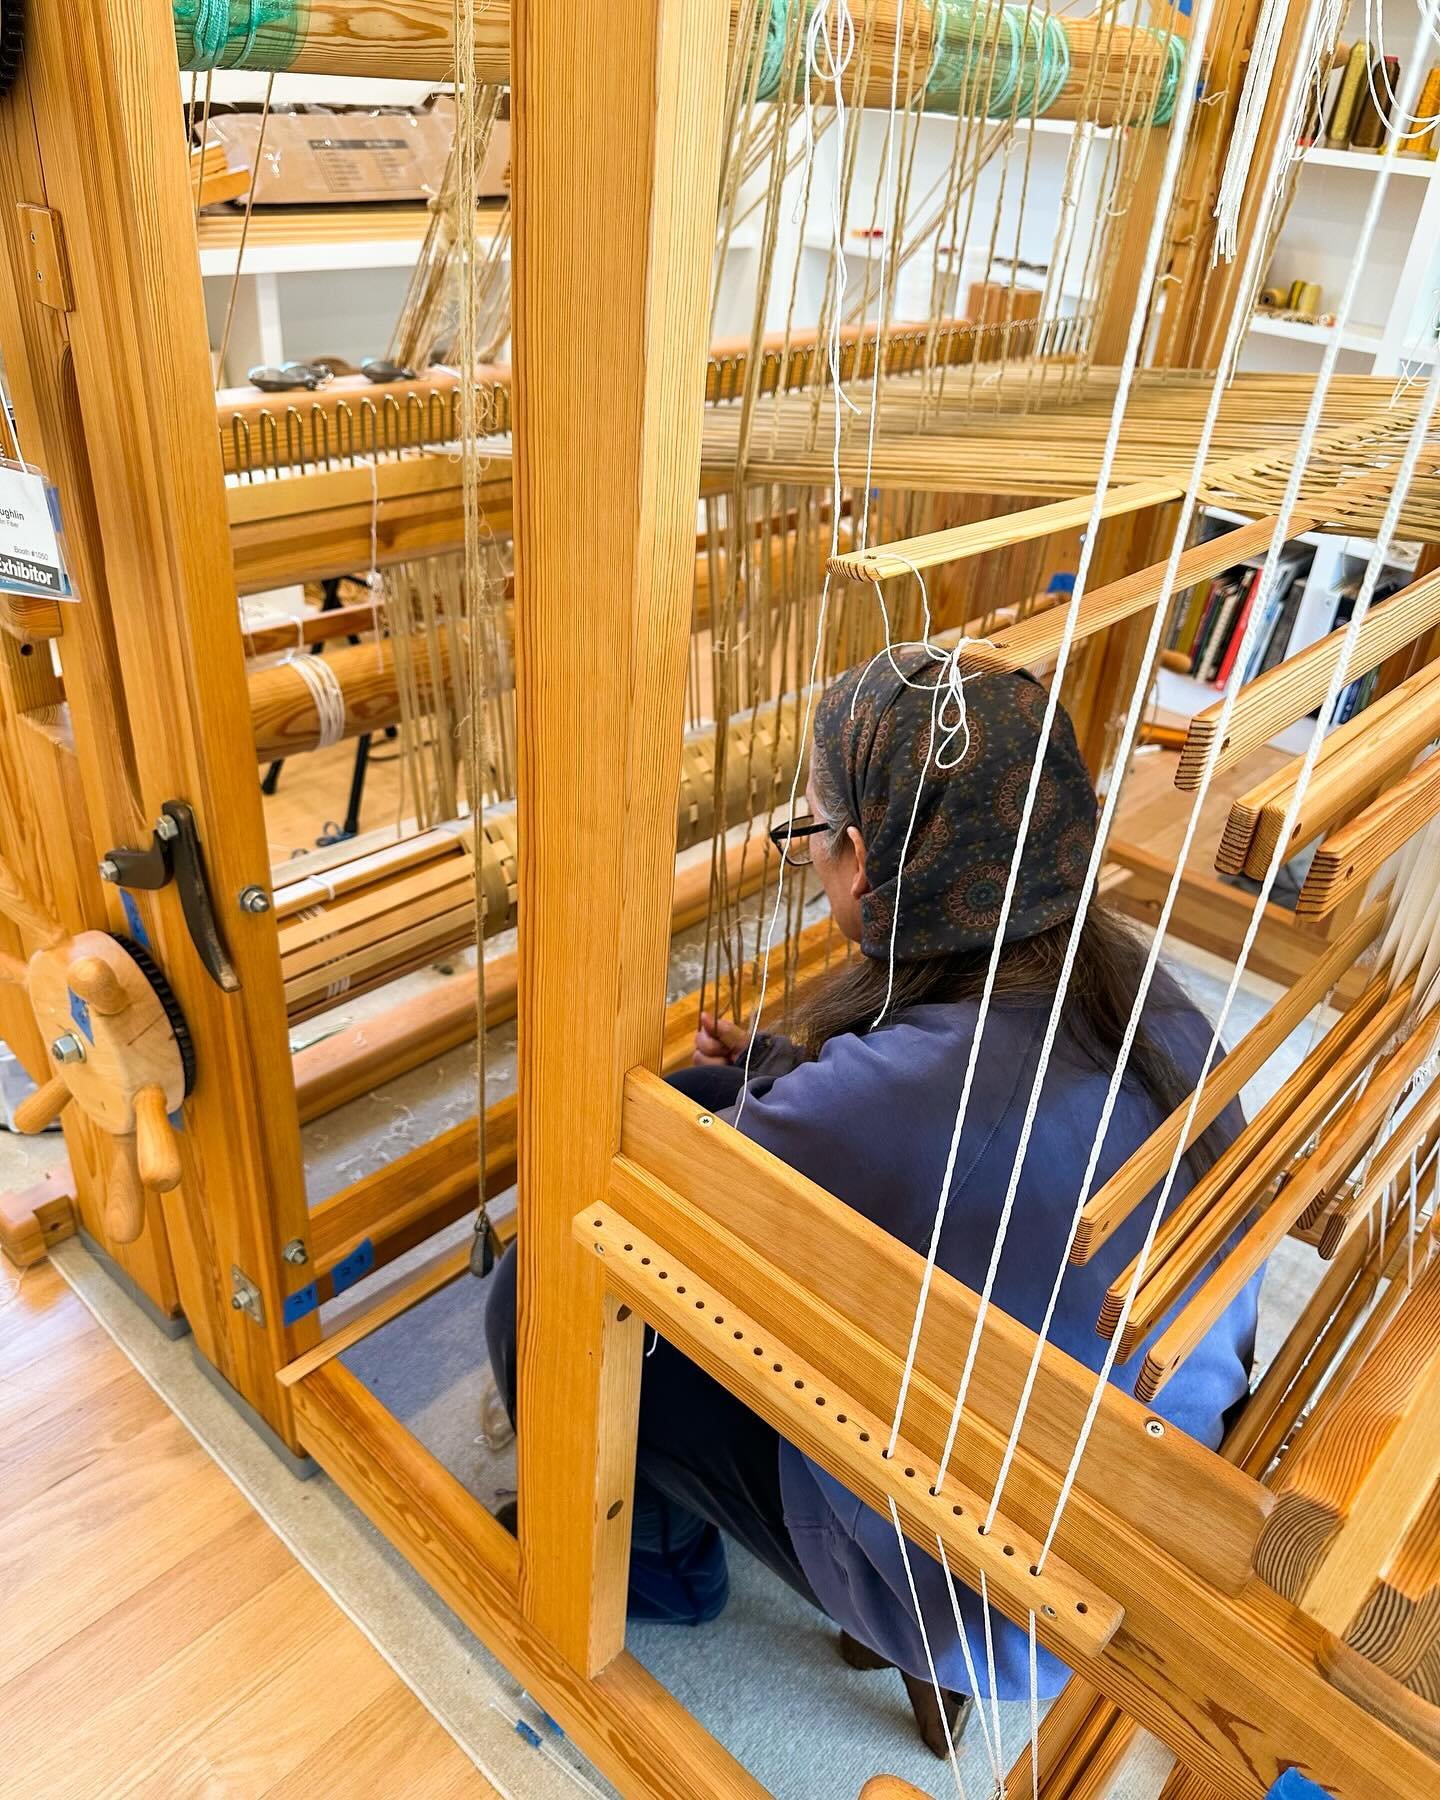 Good Morning! I realized that photos almost always show me at the front of the loom, but, in truth, I spend a lot of time in the loom...

This has been a tough week and a half. A week ago this past Monday, I spent the cleaning out my raised beds and 